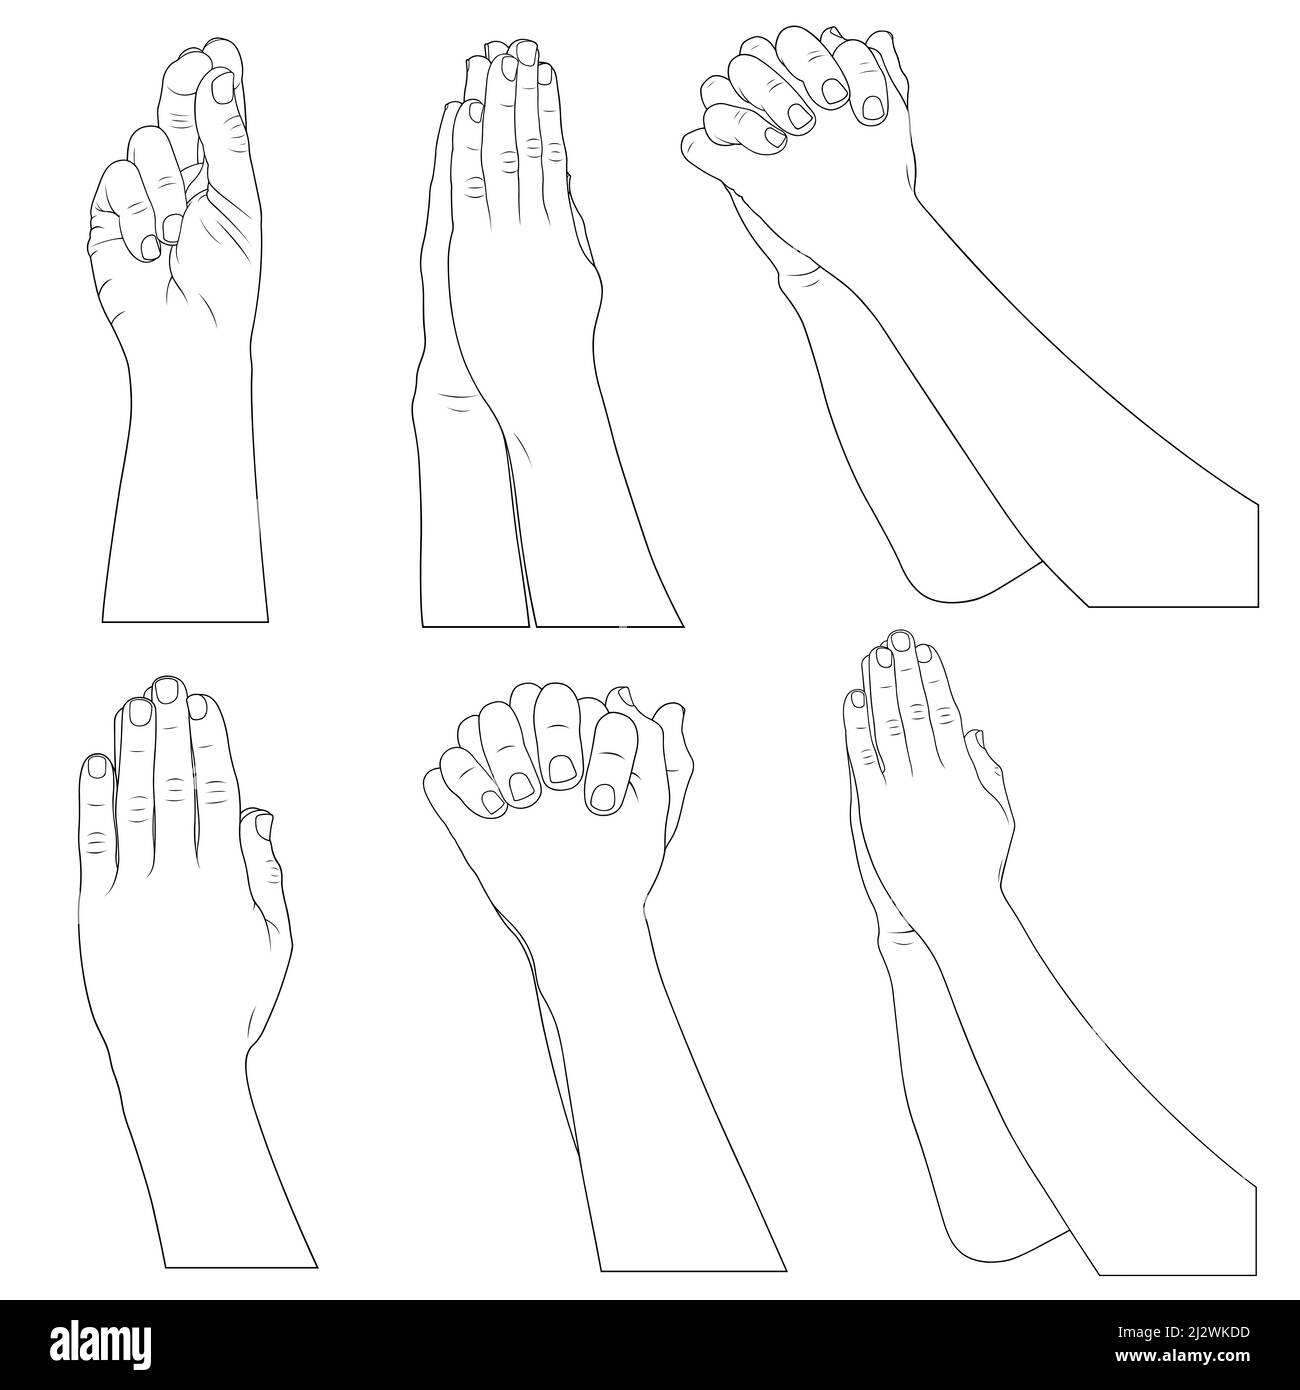 Collection of different praying hands illustration isolated on white Stock Photo